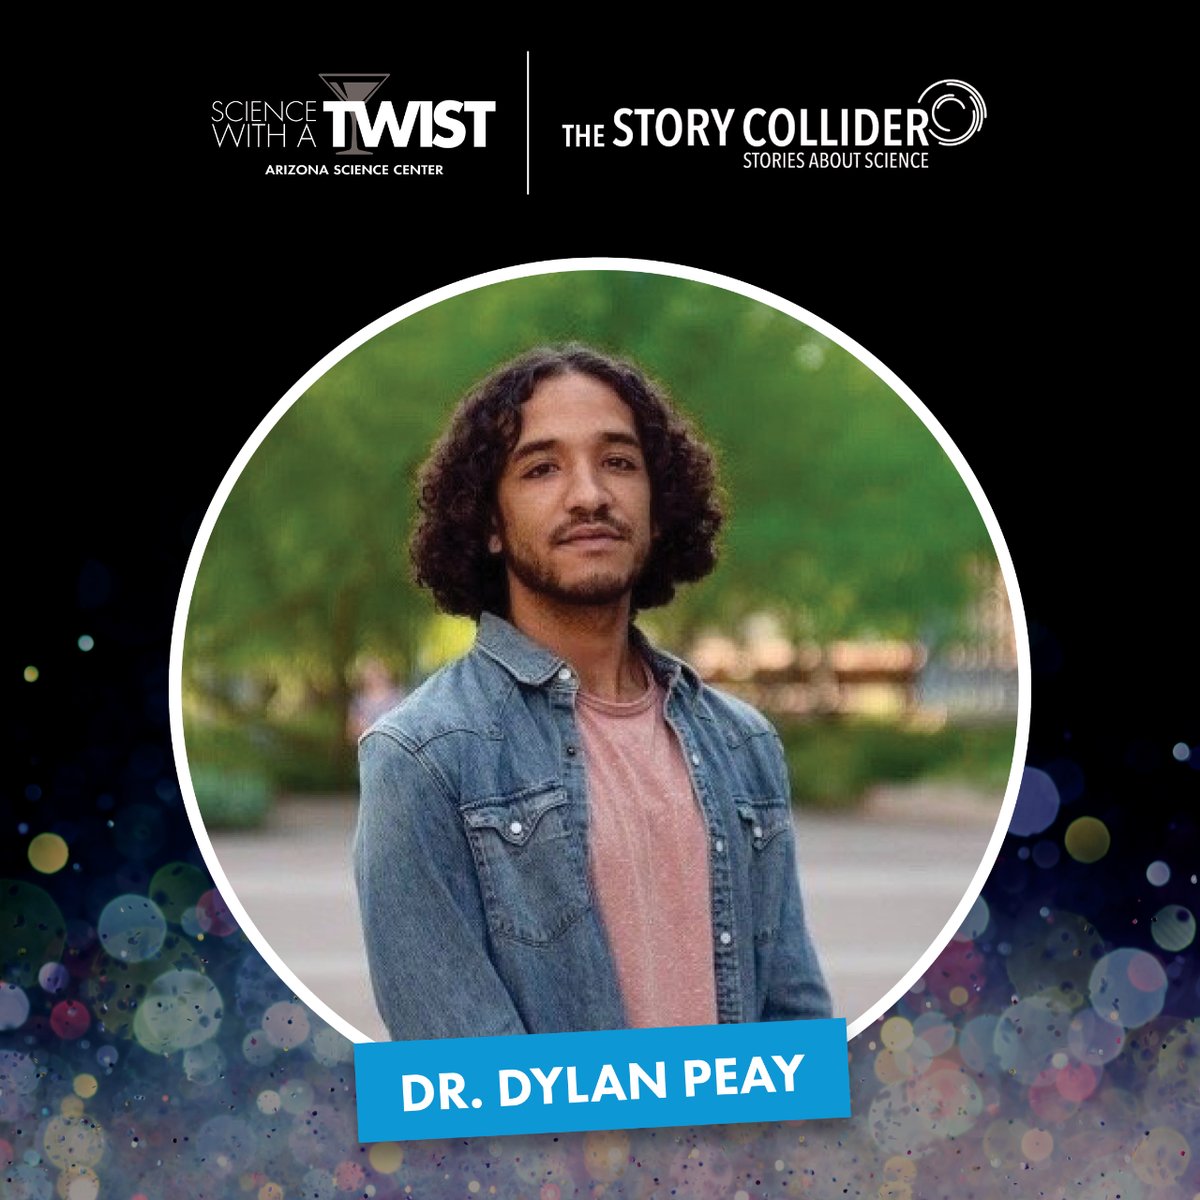 Meet Dr. Dylan Peay 📖 From STEM outreach to behavioral neuroscience, his journey from Philly to AZ is one of dedication, education and diversity. Catch him as a storyteller at the Science Center's Science With a TWIST with @storycollider on April 26 🍸 azscience.org/swat